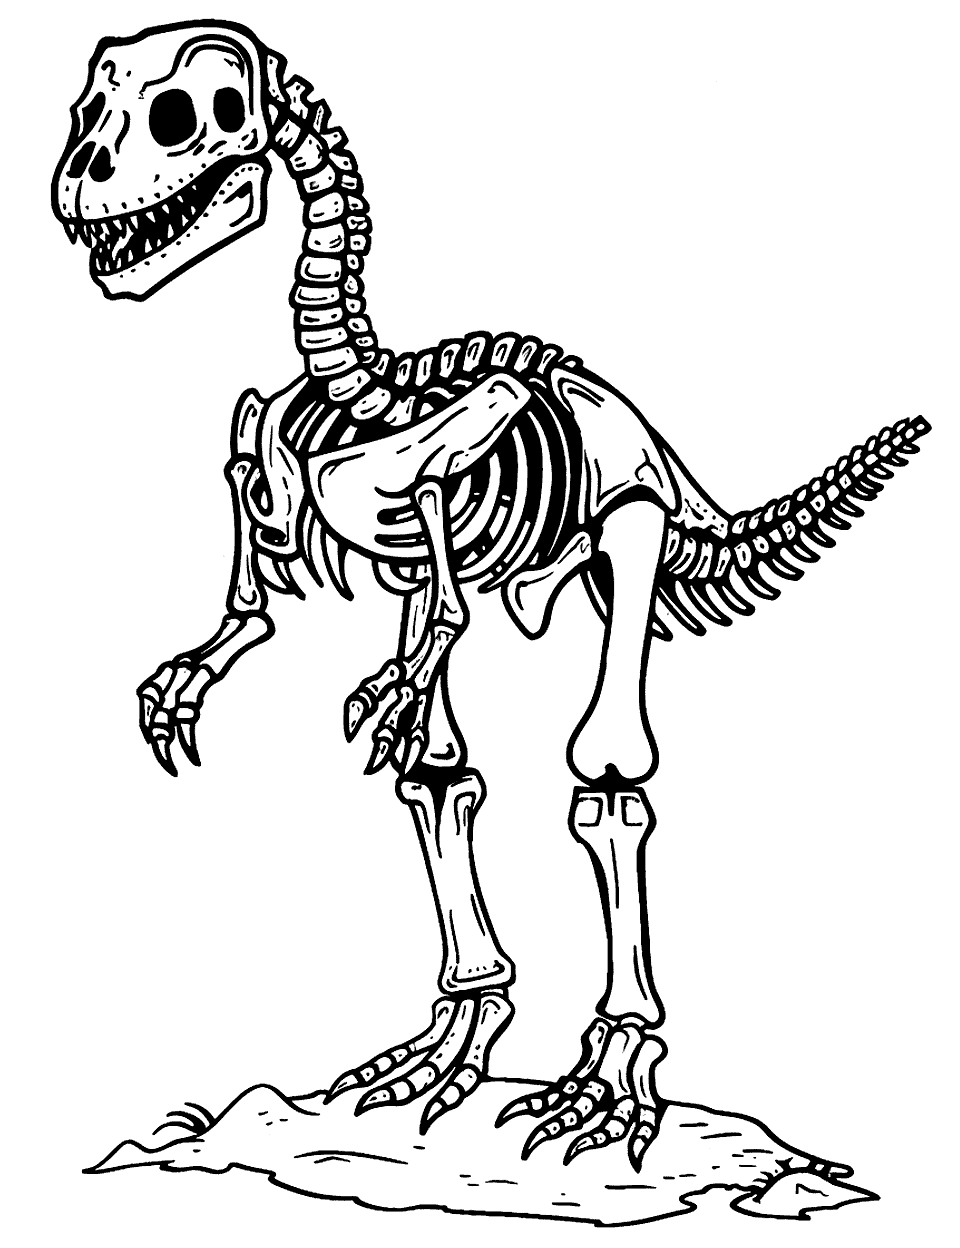 Friendly Dinosaur Skeleton Coloring Page - A smiling dinosaur skeleton standing in a museum.